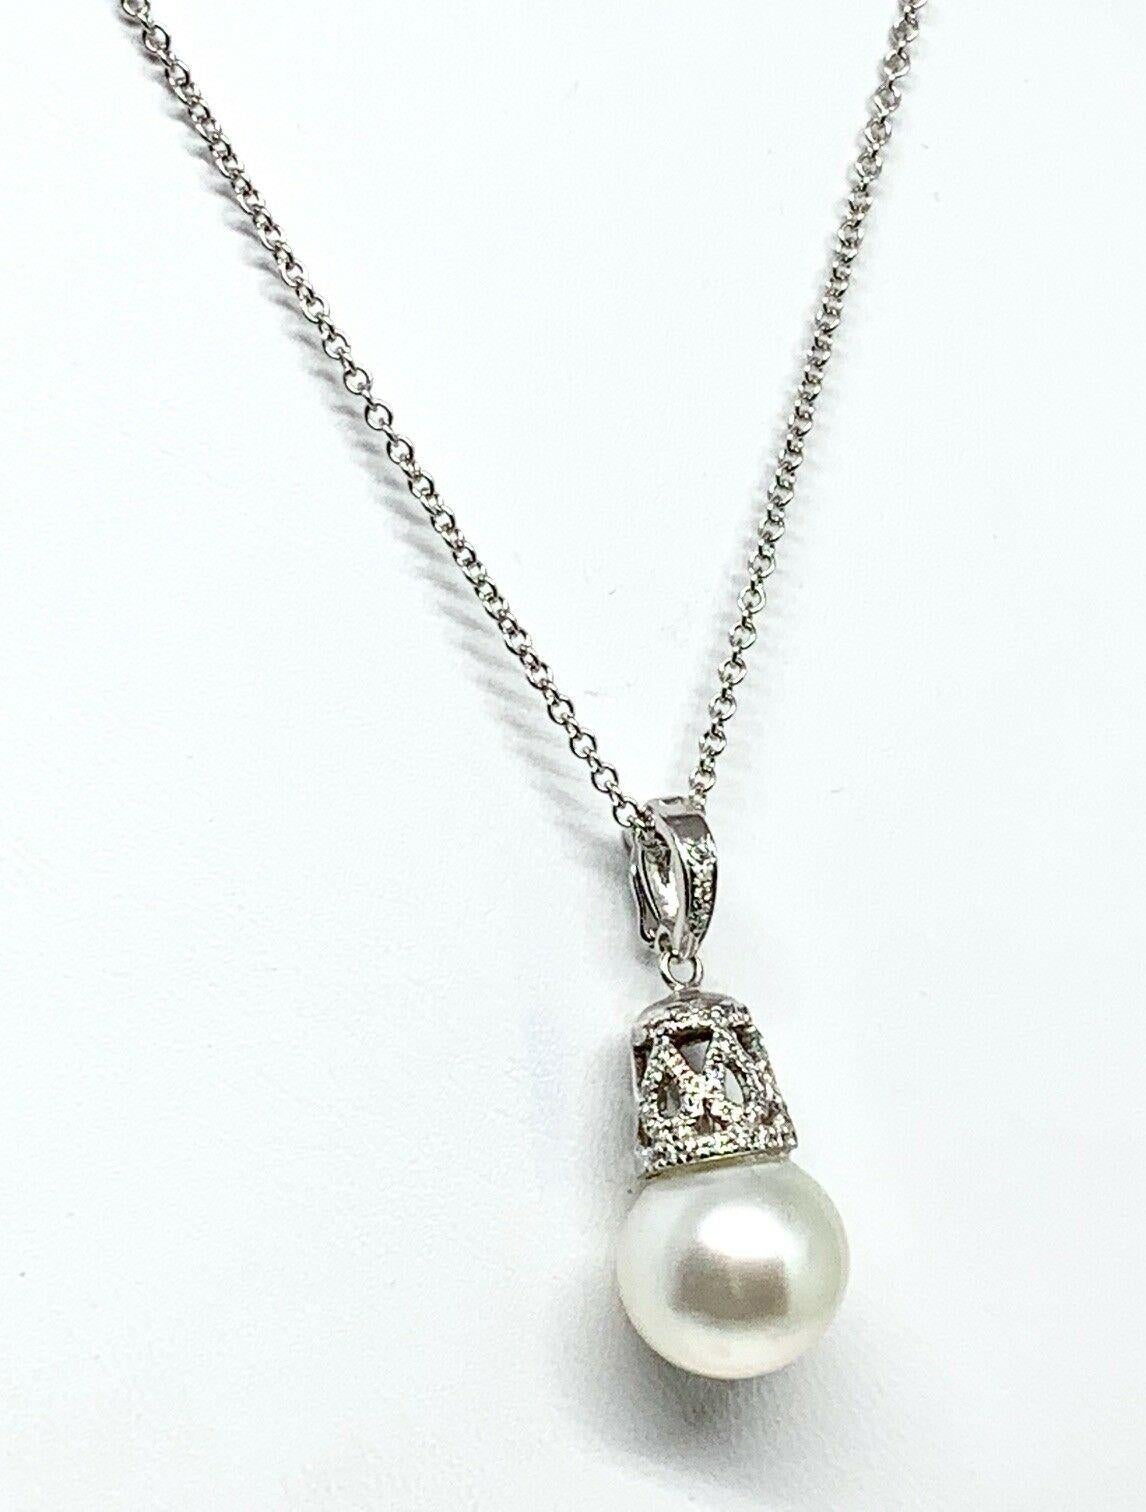 Diamond South Sea Pearl Necklace 18k White Gold 0.10 TCW Certified 5